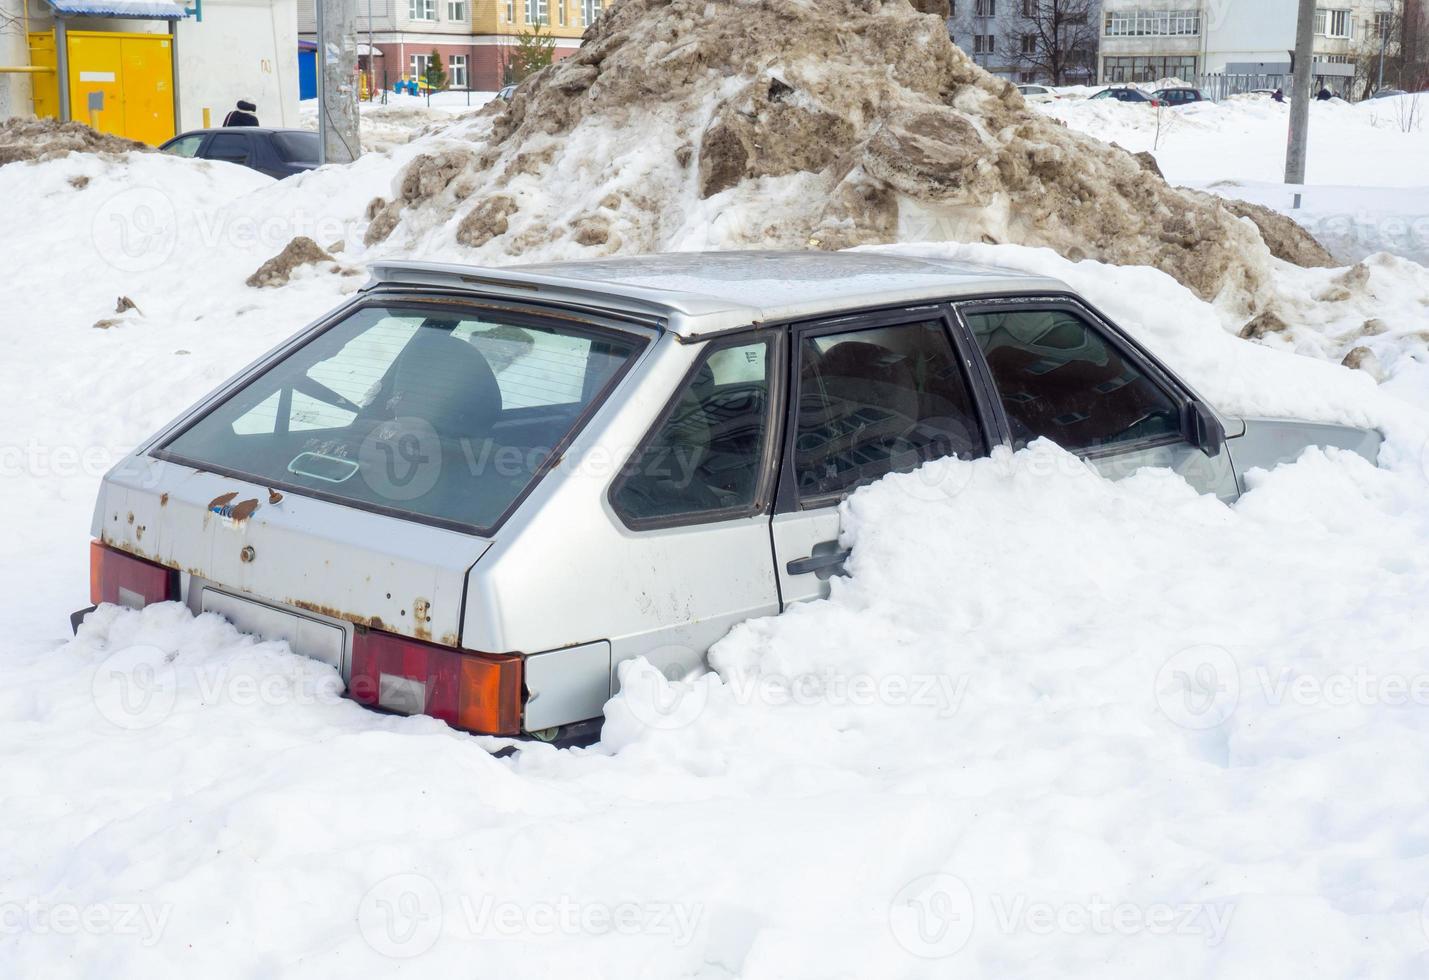 the car got stuck in the snow. Left for the winter under the snow photo